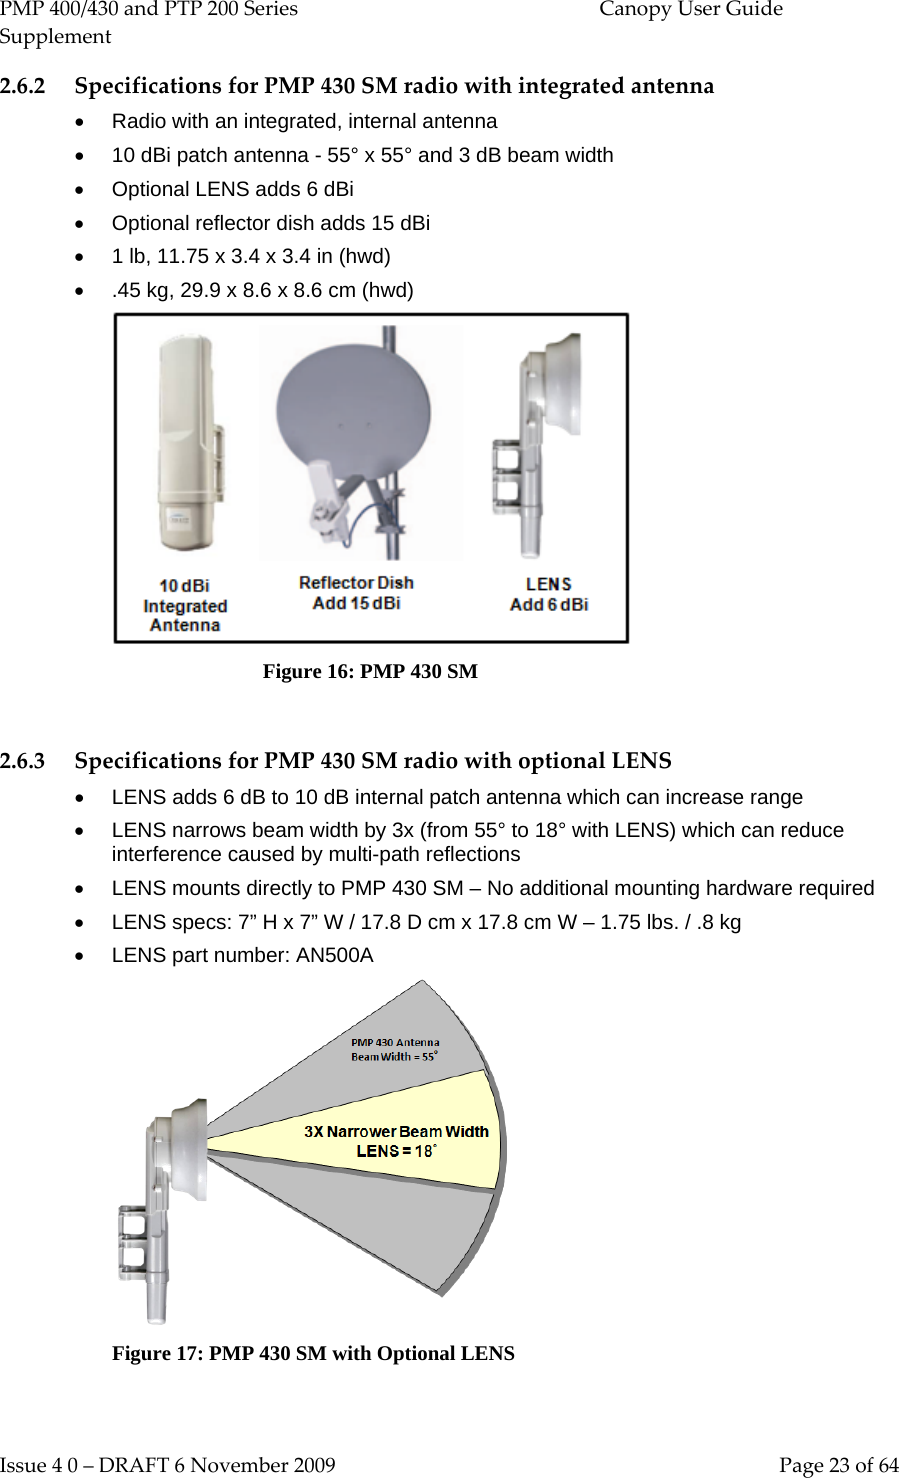 PMP 400/430 and PTP 200 Series  Canopy User Guide Supplement Issue 4 0 – DRAFT 6 November 2009    Page 23 of 64 2.6.2 Specifications for PMP 430 SM radio with integrated antenna • Radio with an integrated, internal antenna • 10 dBi patch antenna - 55° x 55° and 3 dB beam width • Optional LENS adds 6 dBi • Optional reflector dish adds 15 dBi •  1 lb, 11.75 x 3.4 x 3.4 in (hwd) • .45 kg, 29.9 x 8.6 x 8.6 cm (hwd)                               Figure 16: PMP 430 SM  2.6.3 Specifications for PMP 430 SM radio with optional LENS • LENS adds 6 dB to 10 dB internal patch antenna which can increase range • LENS narrows beam width by 3x (from 55° to 18° with LENS) which can reduce interference caused by multi-path reflections • LENS mounts directly to PMP 430 SM – No additional mounting hardware required • LENS specs: 7” H x 7” W / 17.8 D cm x 17.8 cm W – 1.75 lbs. / .8 kg • LENS part number: AN500A  Figure 17: PMP 430 SM with Optional LENS  